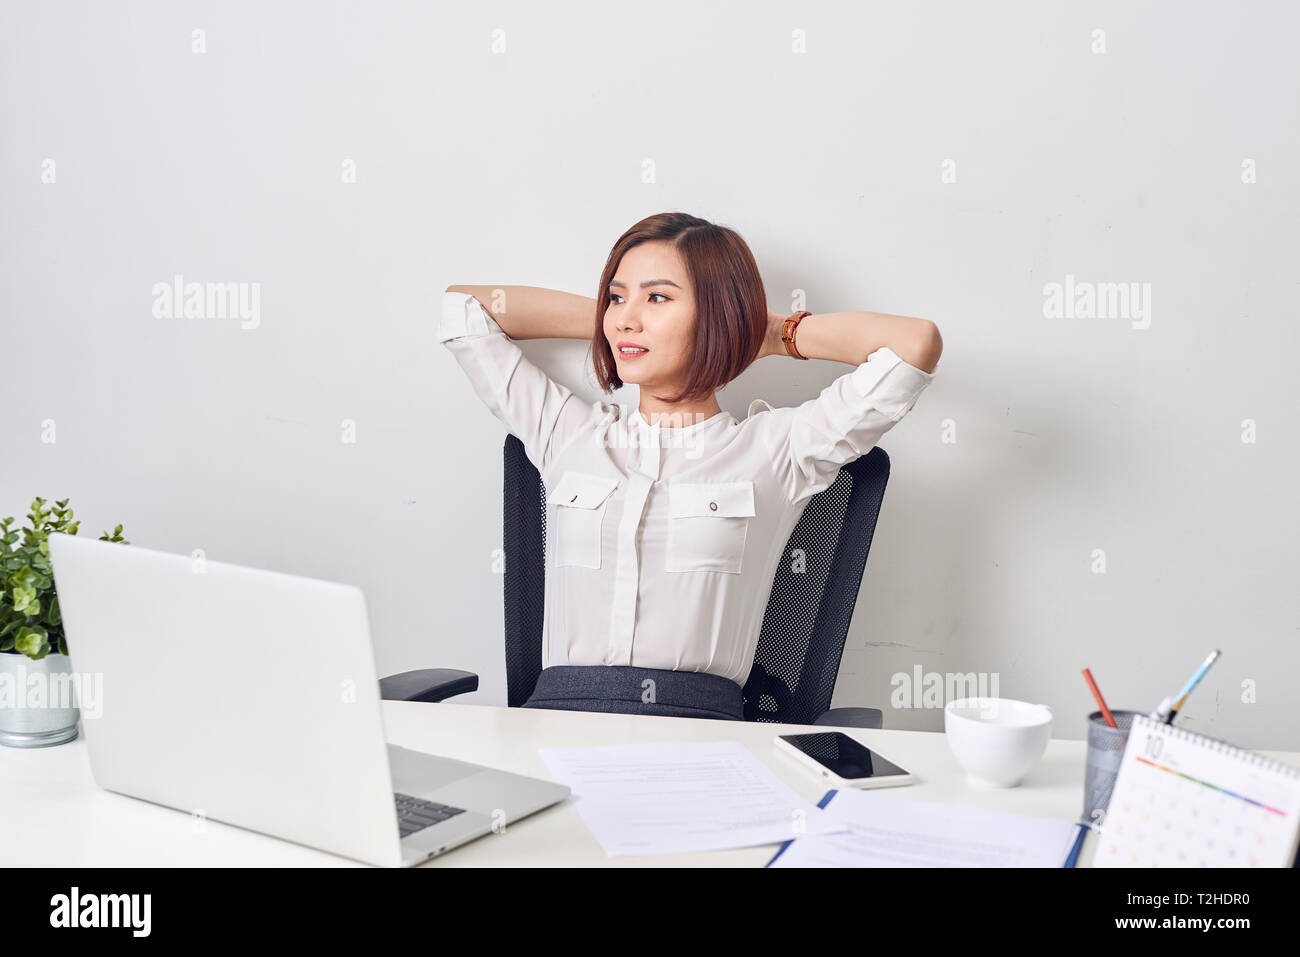 Business woman resting in the office after a working day leaning back her hands behind her head Stock Photo